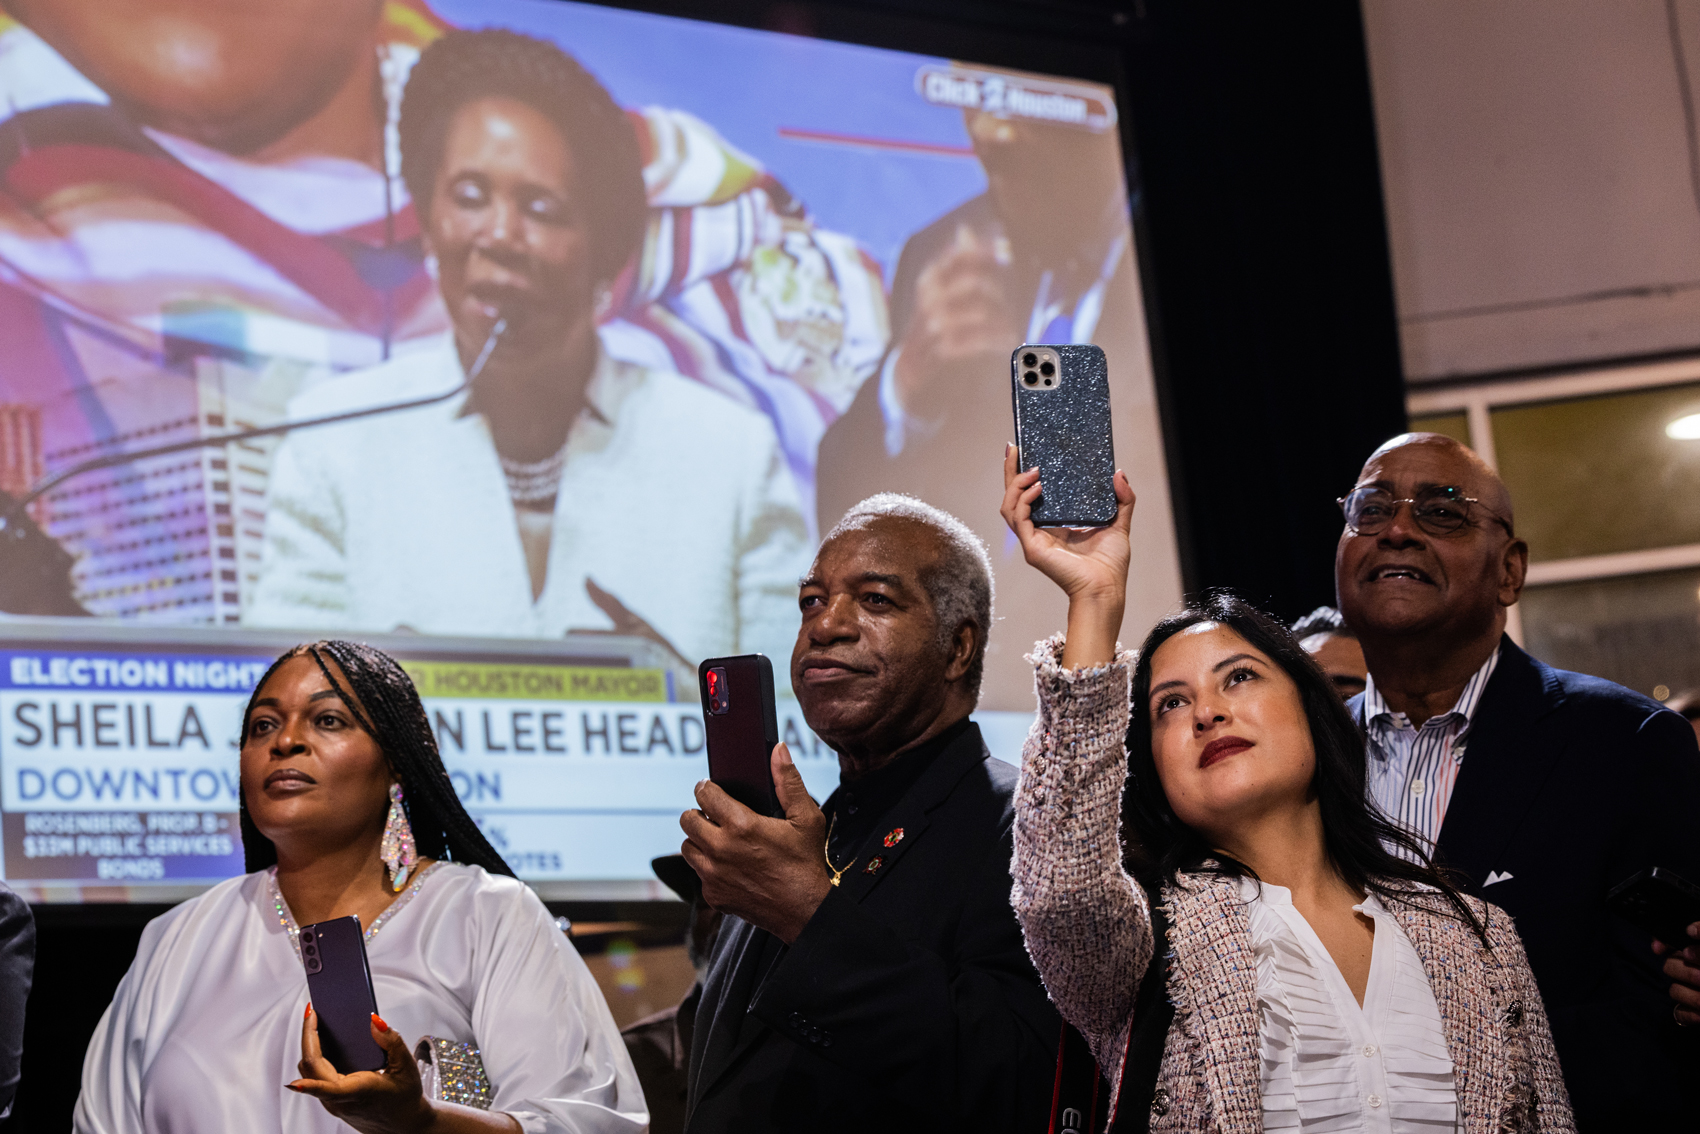 Congresswoman Sheila Jackson Lee supporters record her while she addresses guests at her Election Day watch party